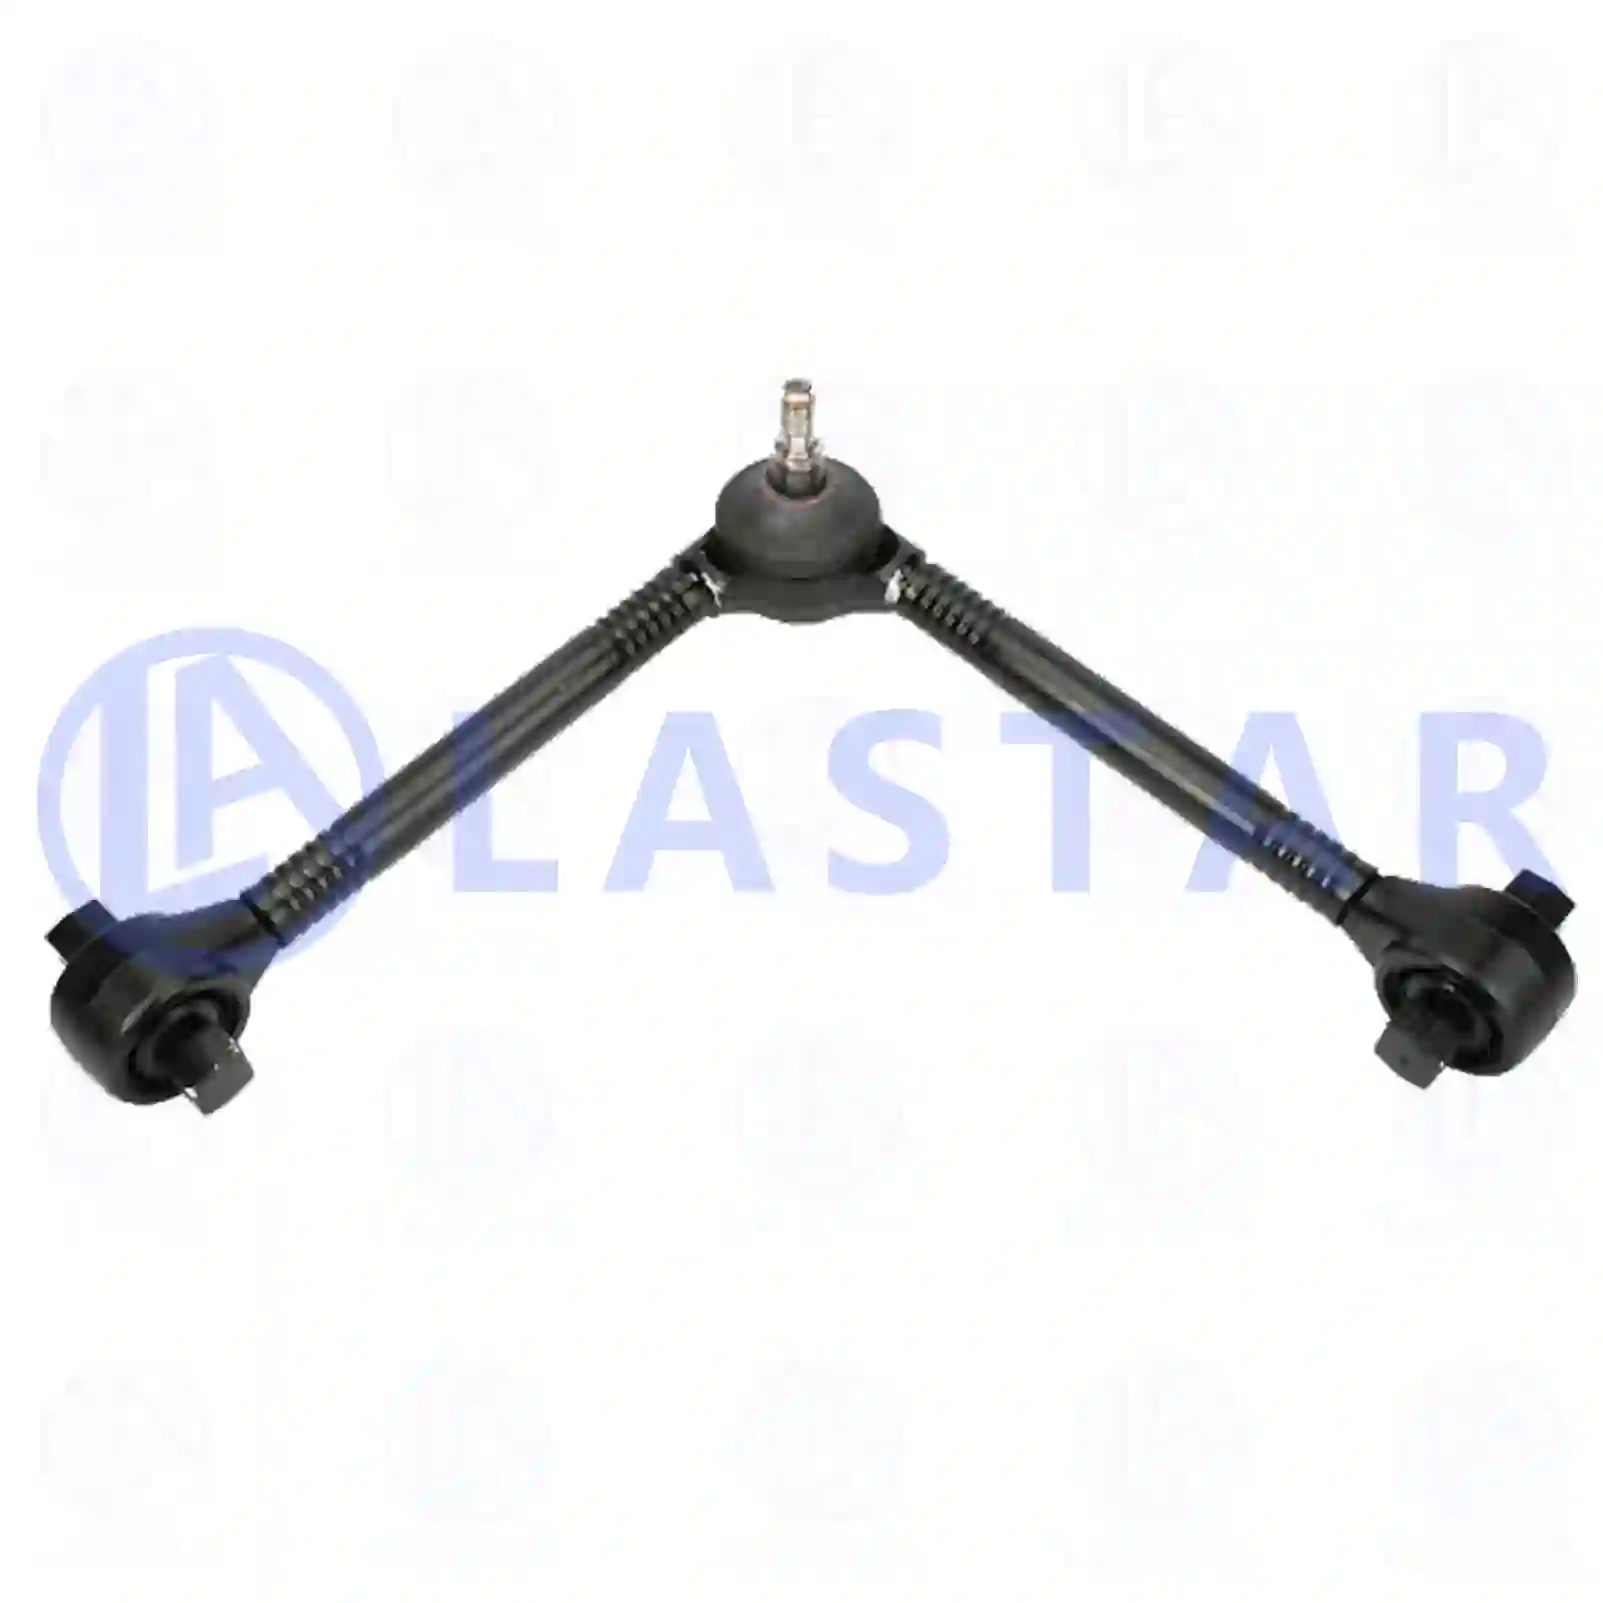 V-stay, 77727454, 3563331304, 6133330004, 6133330104 ||  77727454 Lastar Spare Part | Truck Spare Parts, Auotomotive Spare Parts V-stay, 77727454, 3563331304, 6133330004, 6133330104 ||  77727454 Lastar Spare Part | Truck Spare Parts, Auotomotive Spare Parts